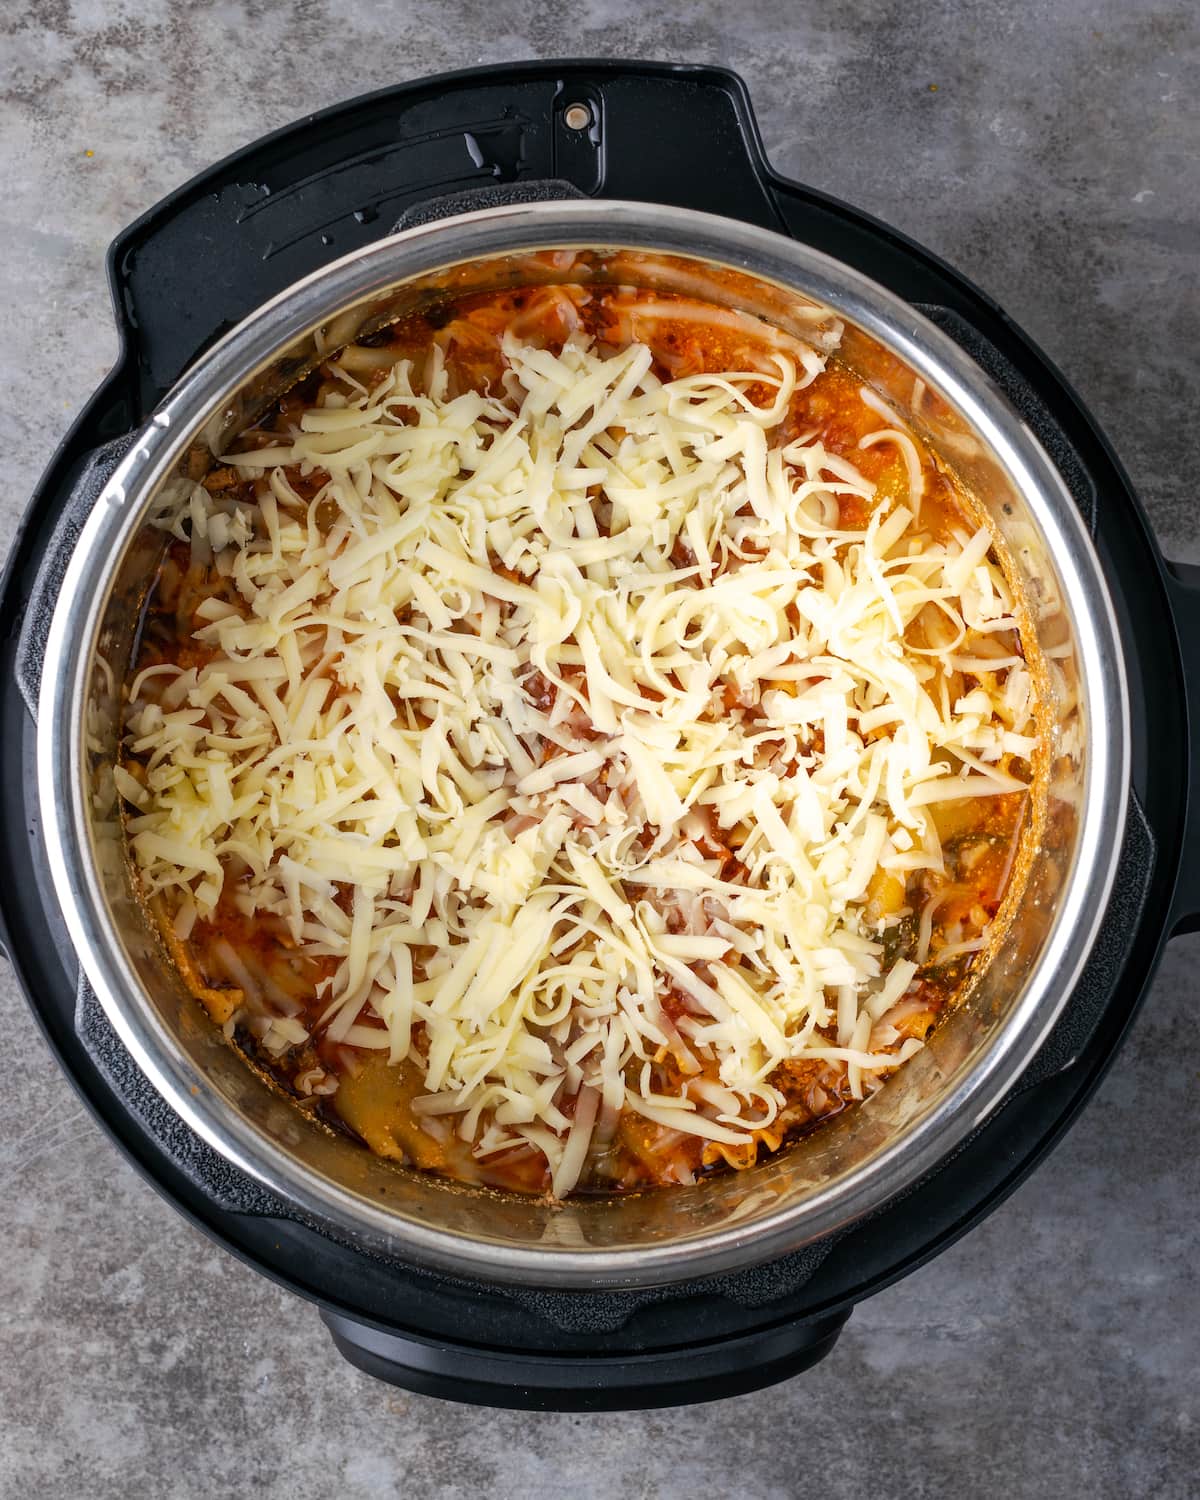 Overhead view of cooked Instant Pot lasagna topped with shredded mozzarella inside the pot.